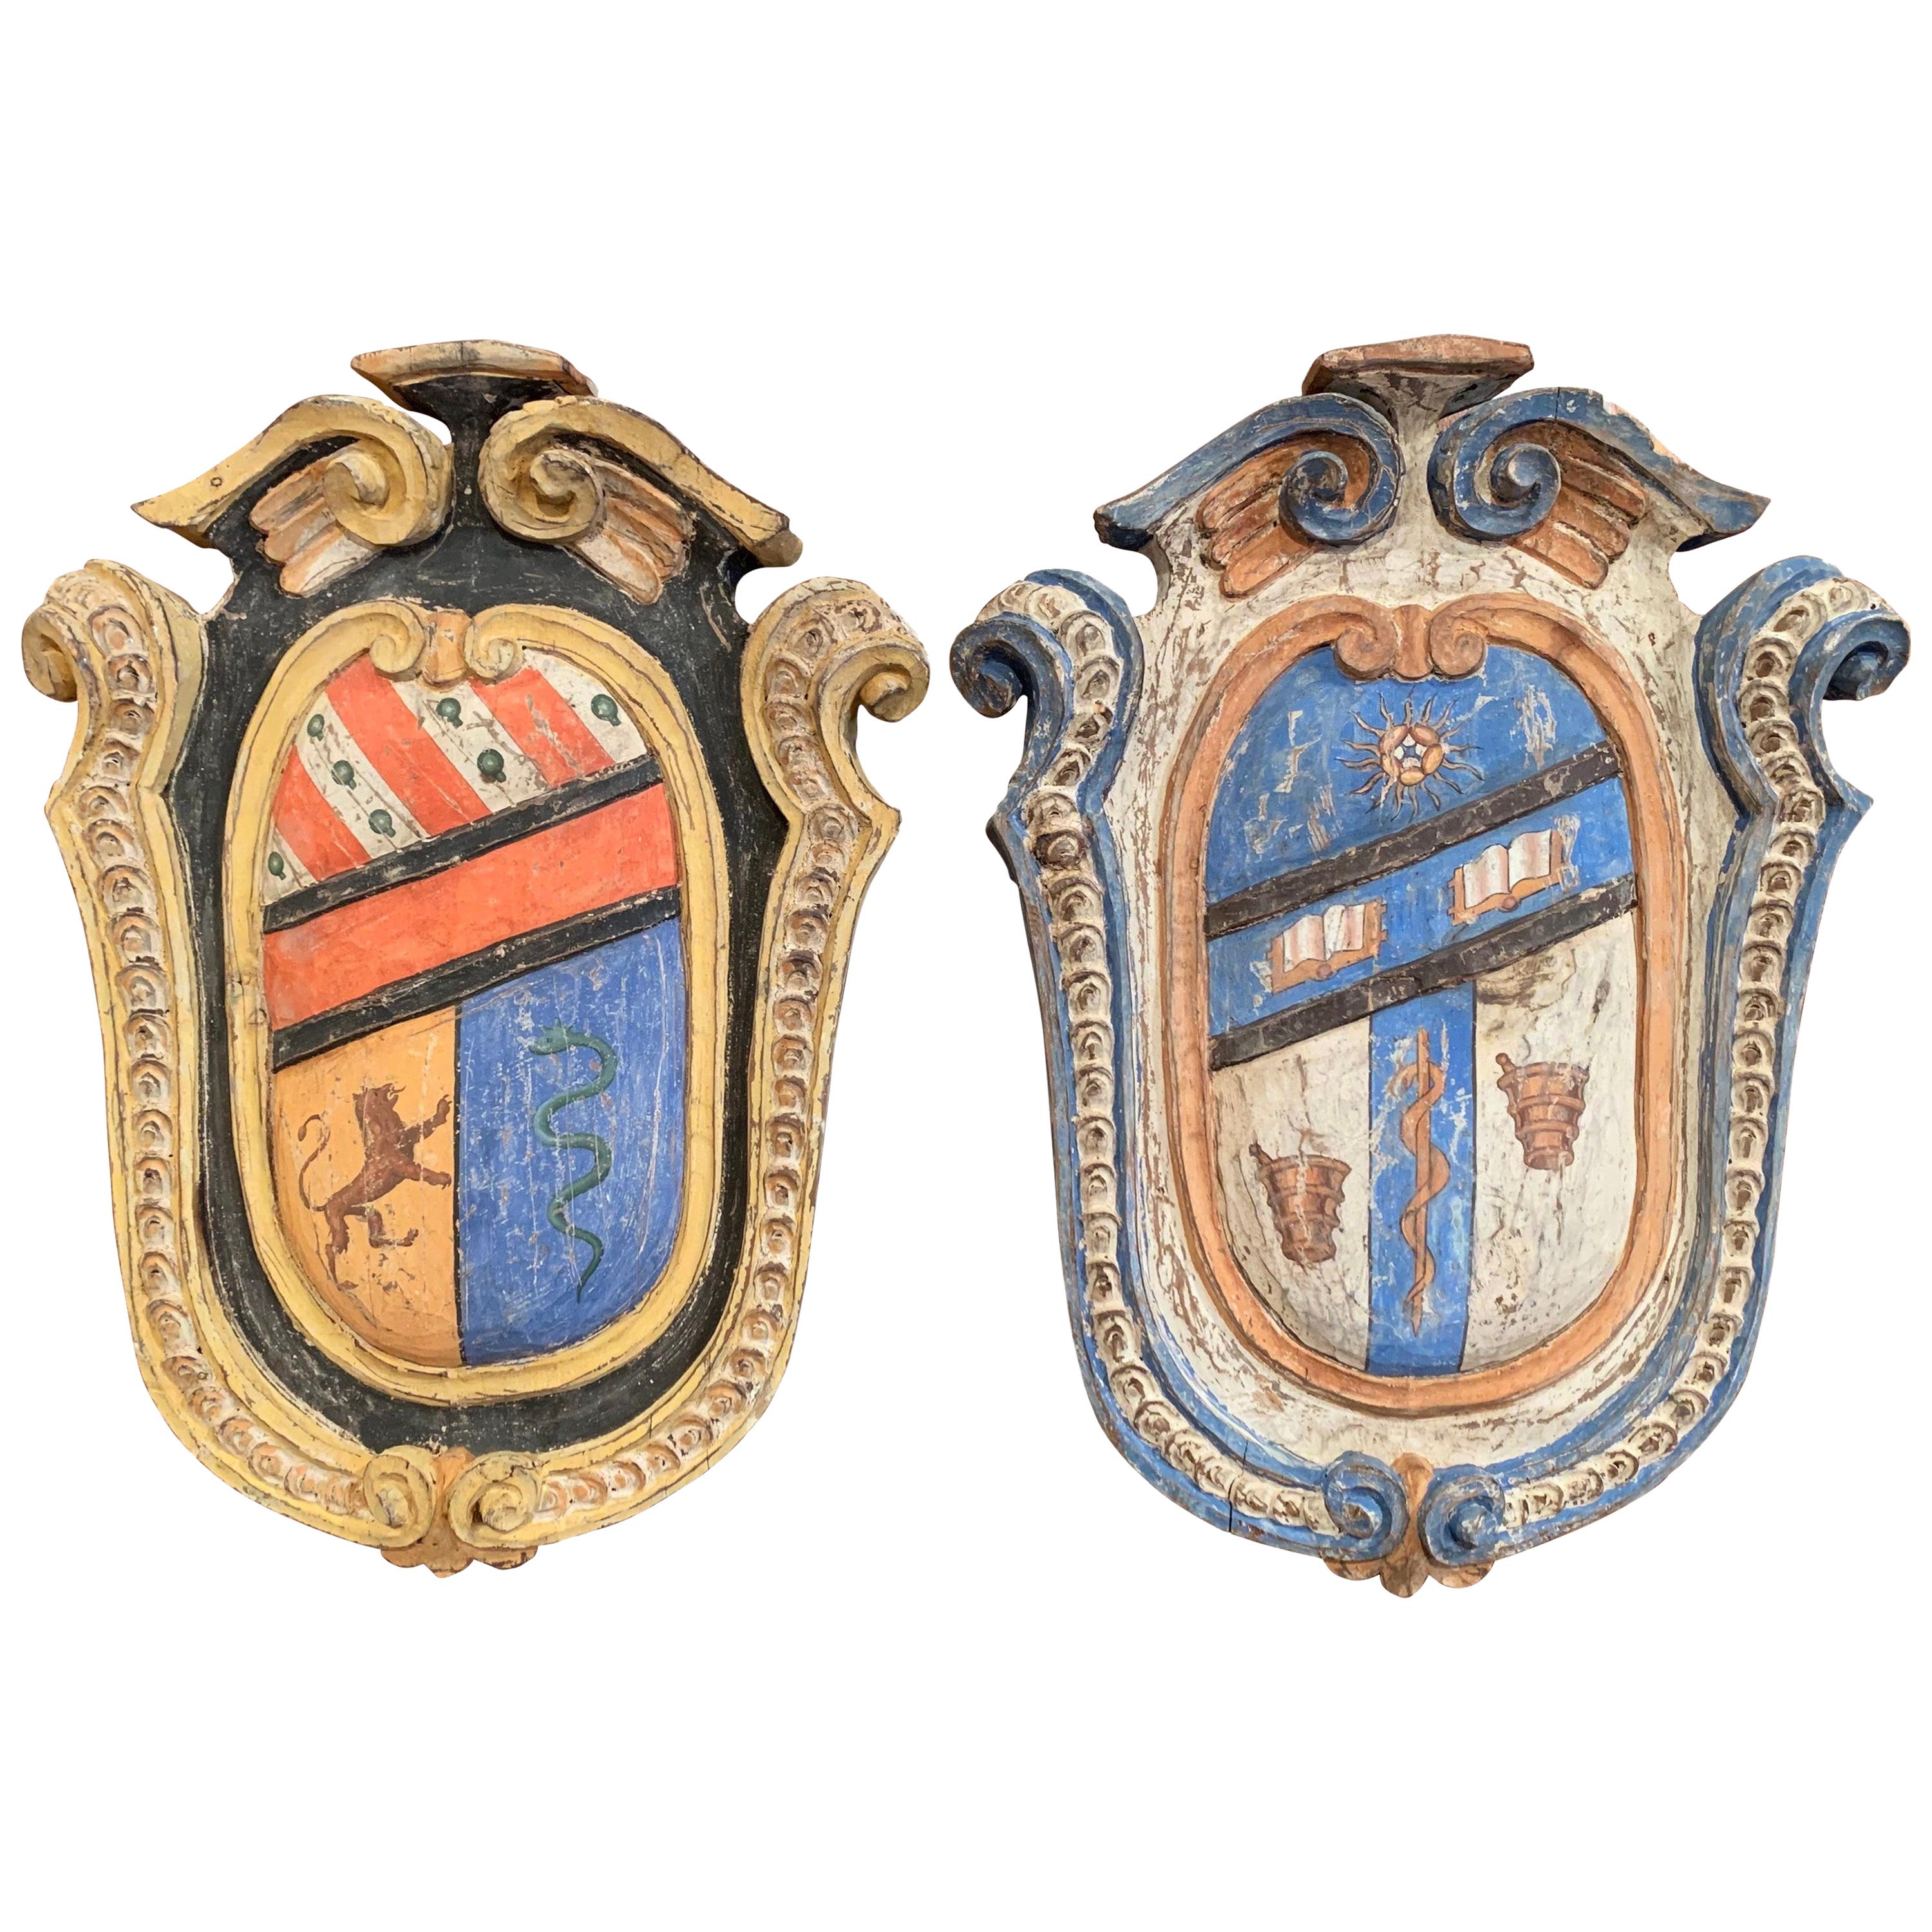 Pair of Early 20th Century French Carved Painted Wall Hanging Shields with Crest